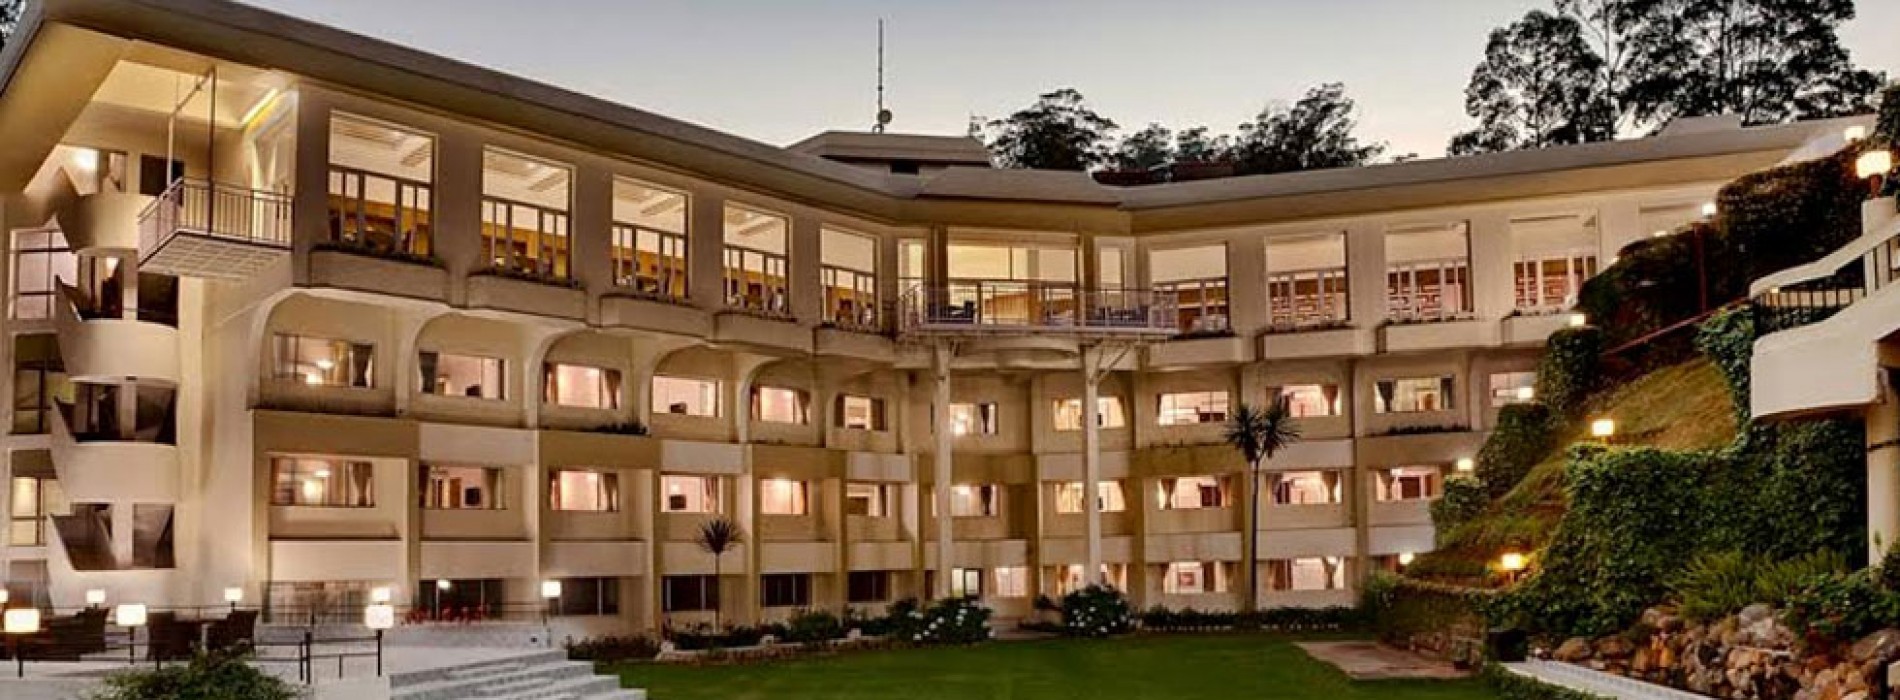 Sinclairs Hotels’ FY16 Net Up 49%